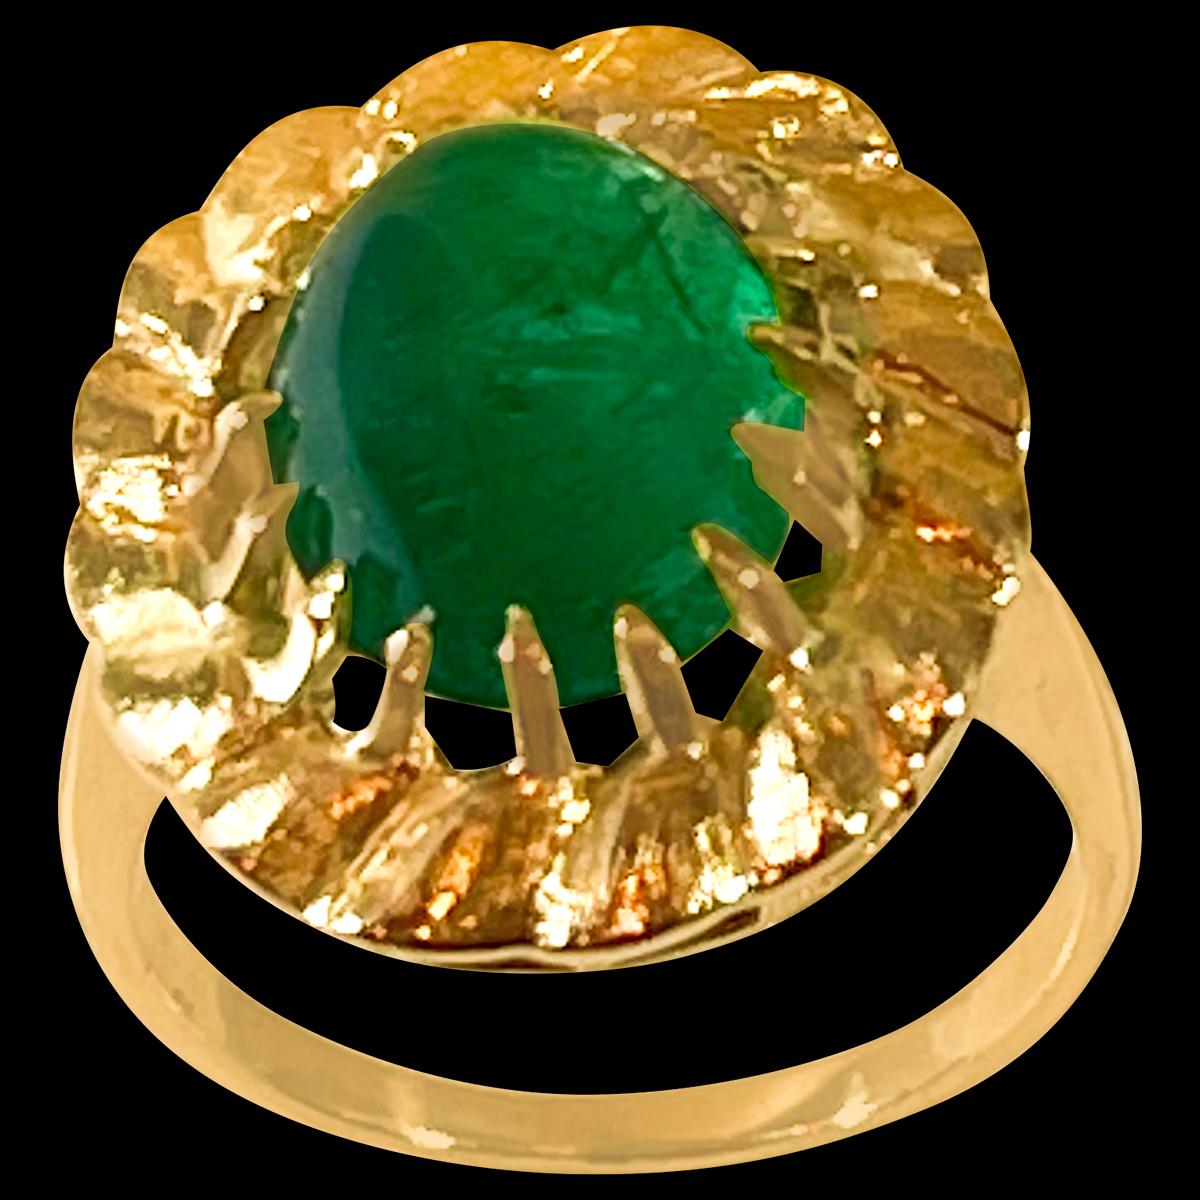 A classic, Cocktail ring 
Large size Emerald  cabochon approximately 4.5 Carat Emerald , Estate with no color enhancement. 
Gold: 14 Karat Yellow  gold ,
Weight: 7.5 gram with stone 
simple ring , no bling 
Emerald: 4.5 Carat 
Origin : Zambia
Color: